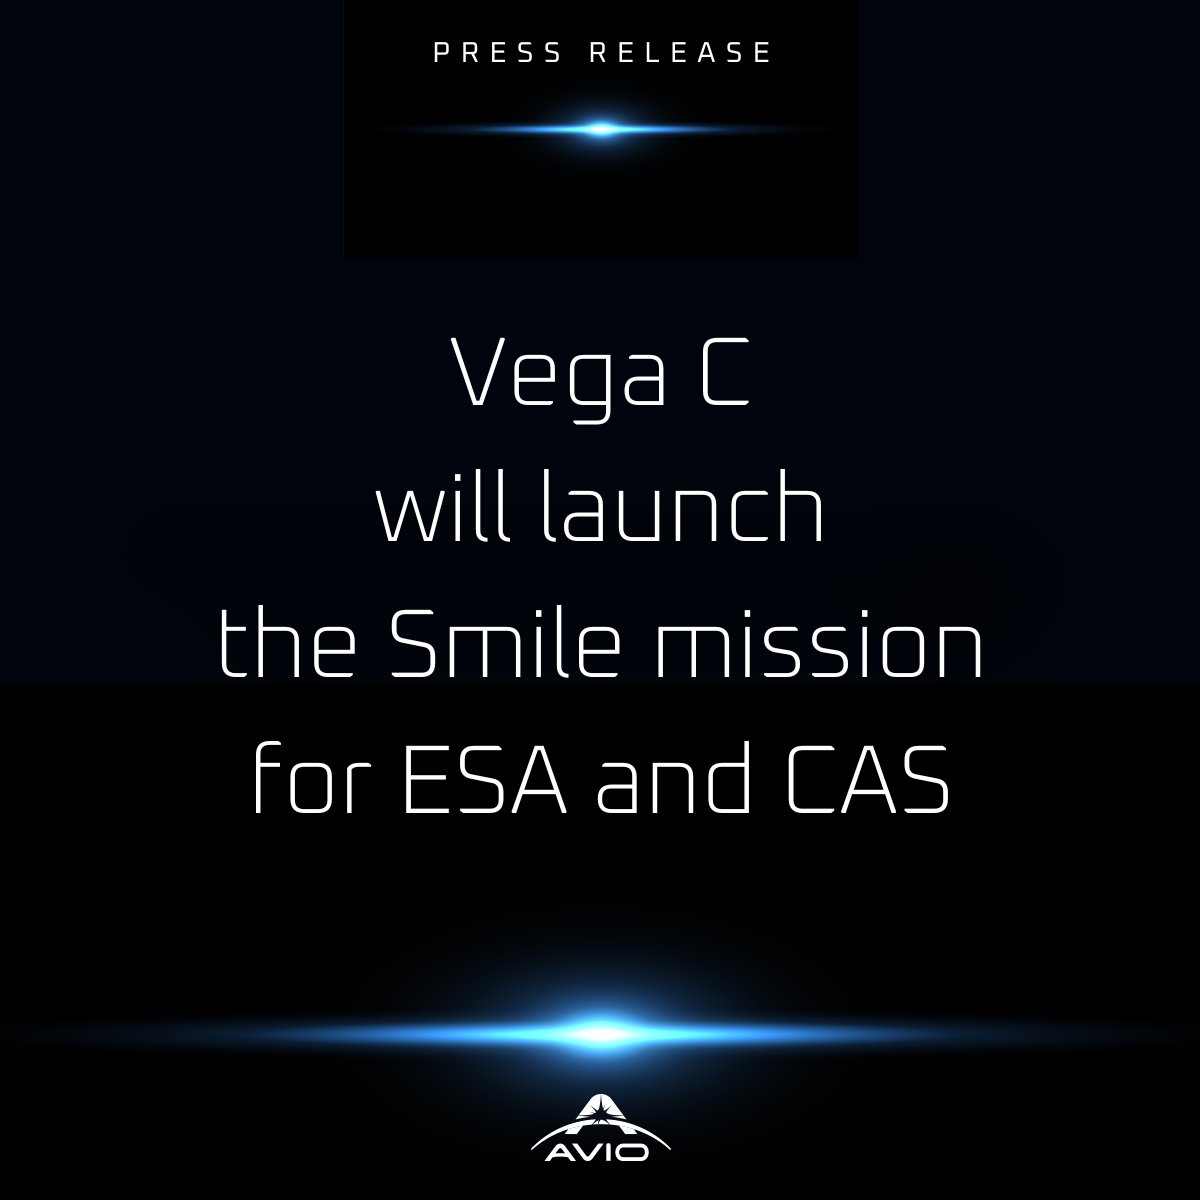 The @esa has selected #VegaC to launch the Solar wind Magnetosphere Ionosphere Link Explorer (Smile) mission. Smile will be launched from the Europe’s Spaceport in French Guiana. The launch is expected for late 2025. Read the press release: bit.ly/3xVawT0 #avio #space